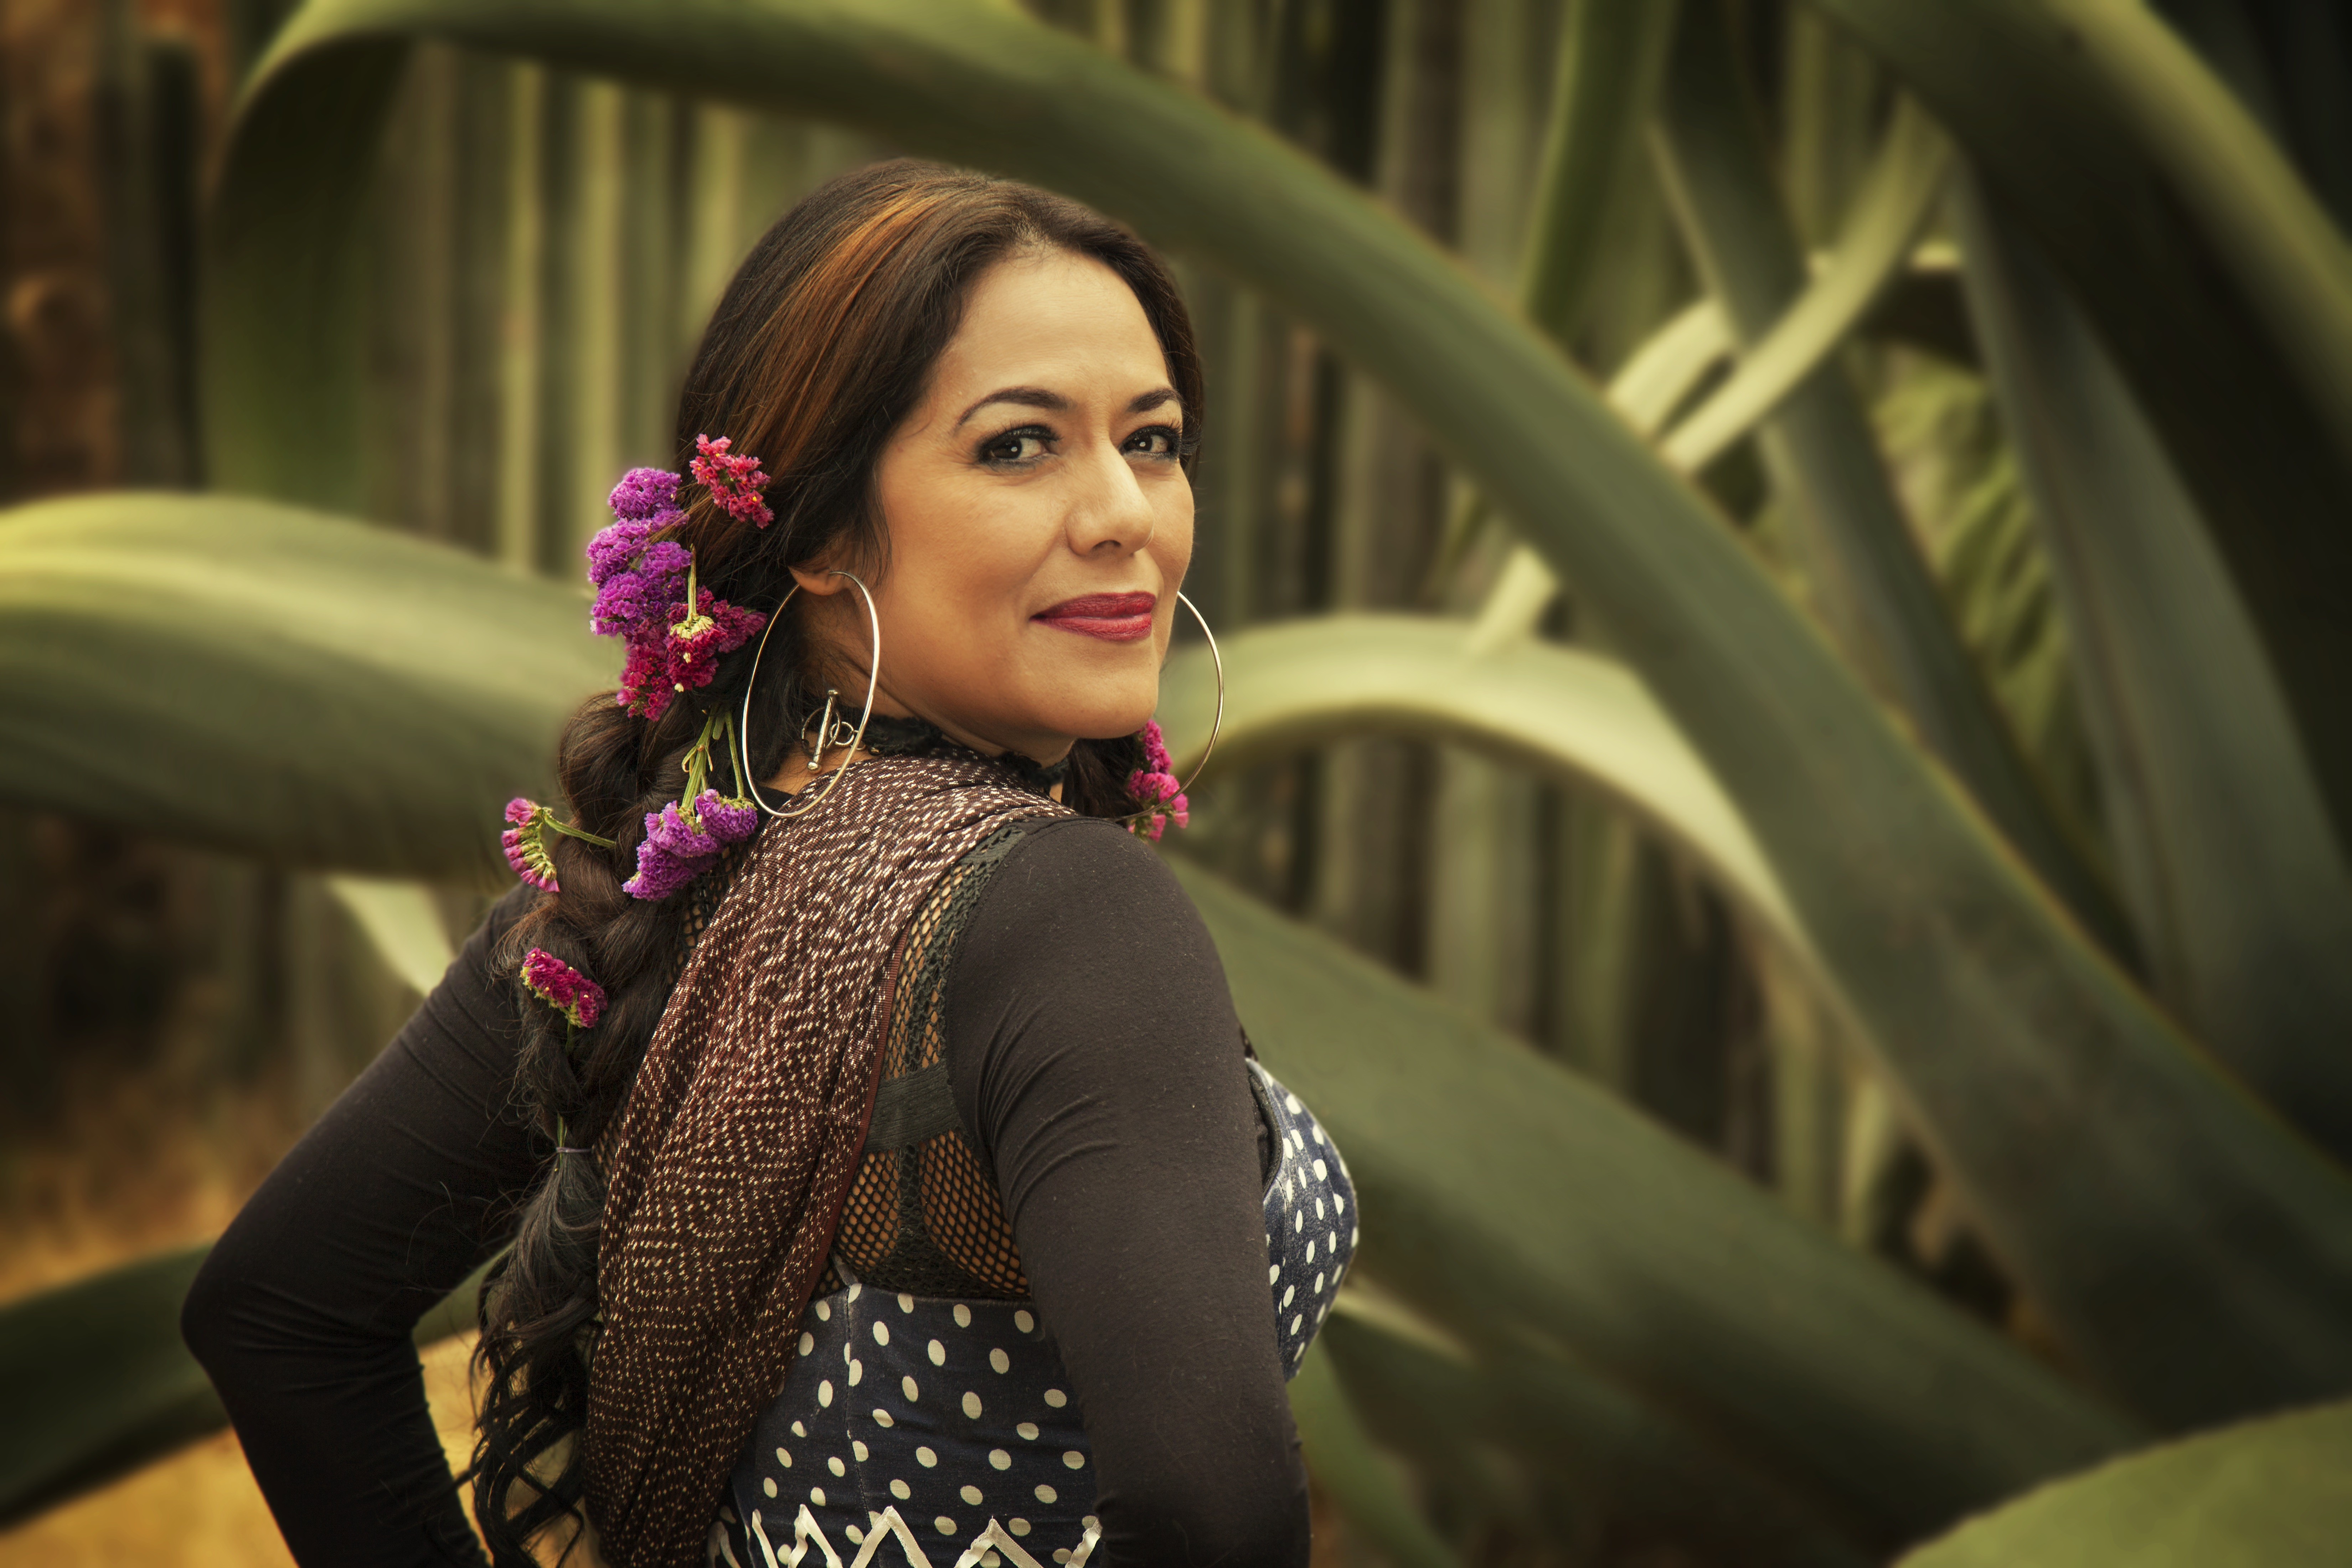 Lila Downs Returns to Costa Mesa Having Creatively Rediscovered Herself.